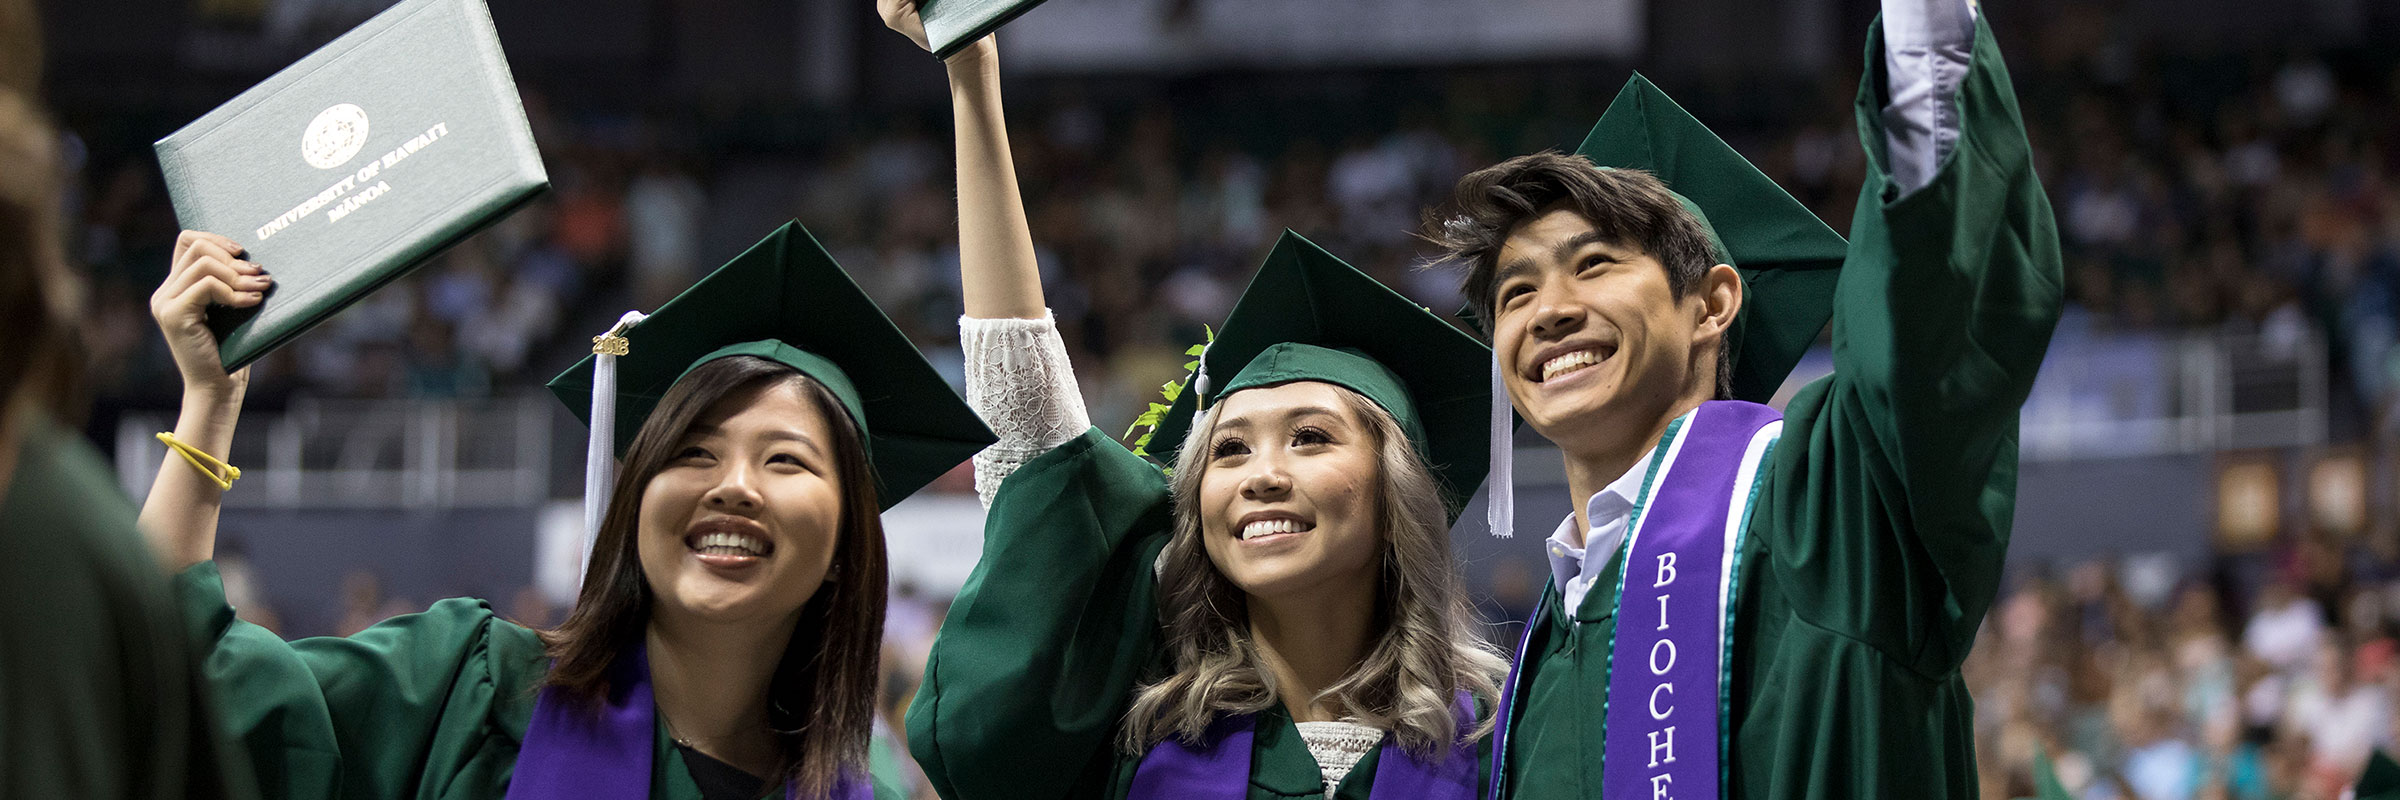 three students in dark green graduation gowns smiling and holding their diplomas at the graduation ceremony